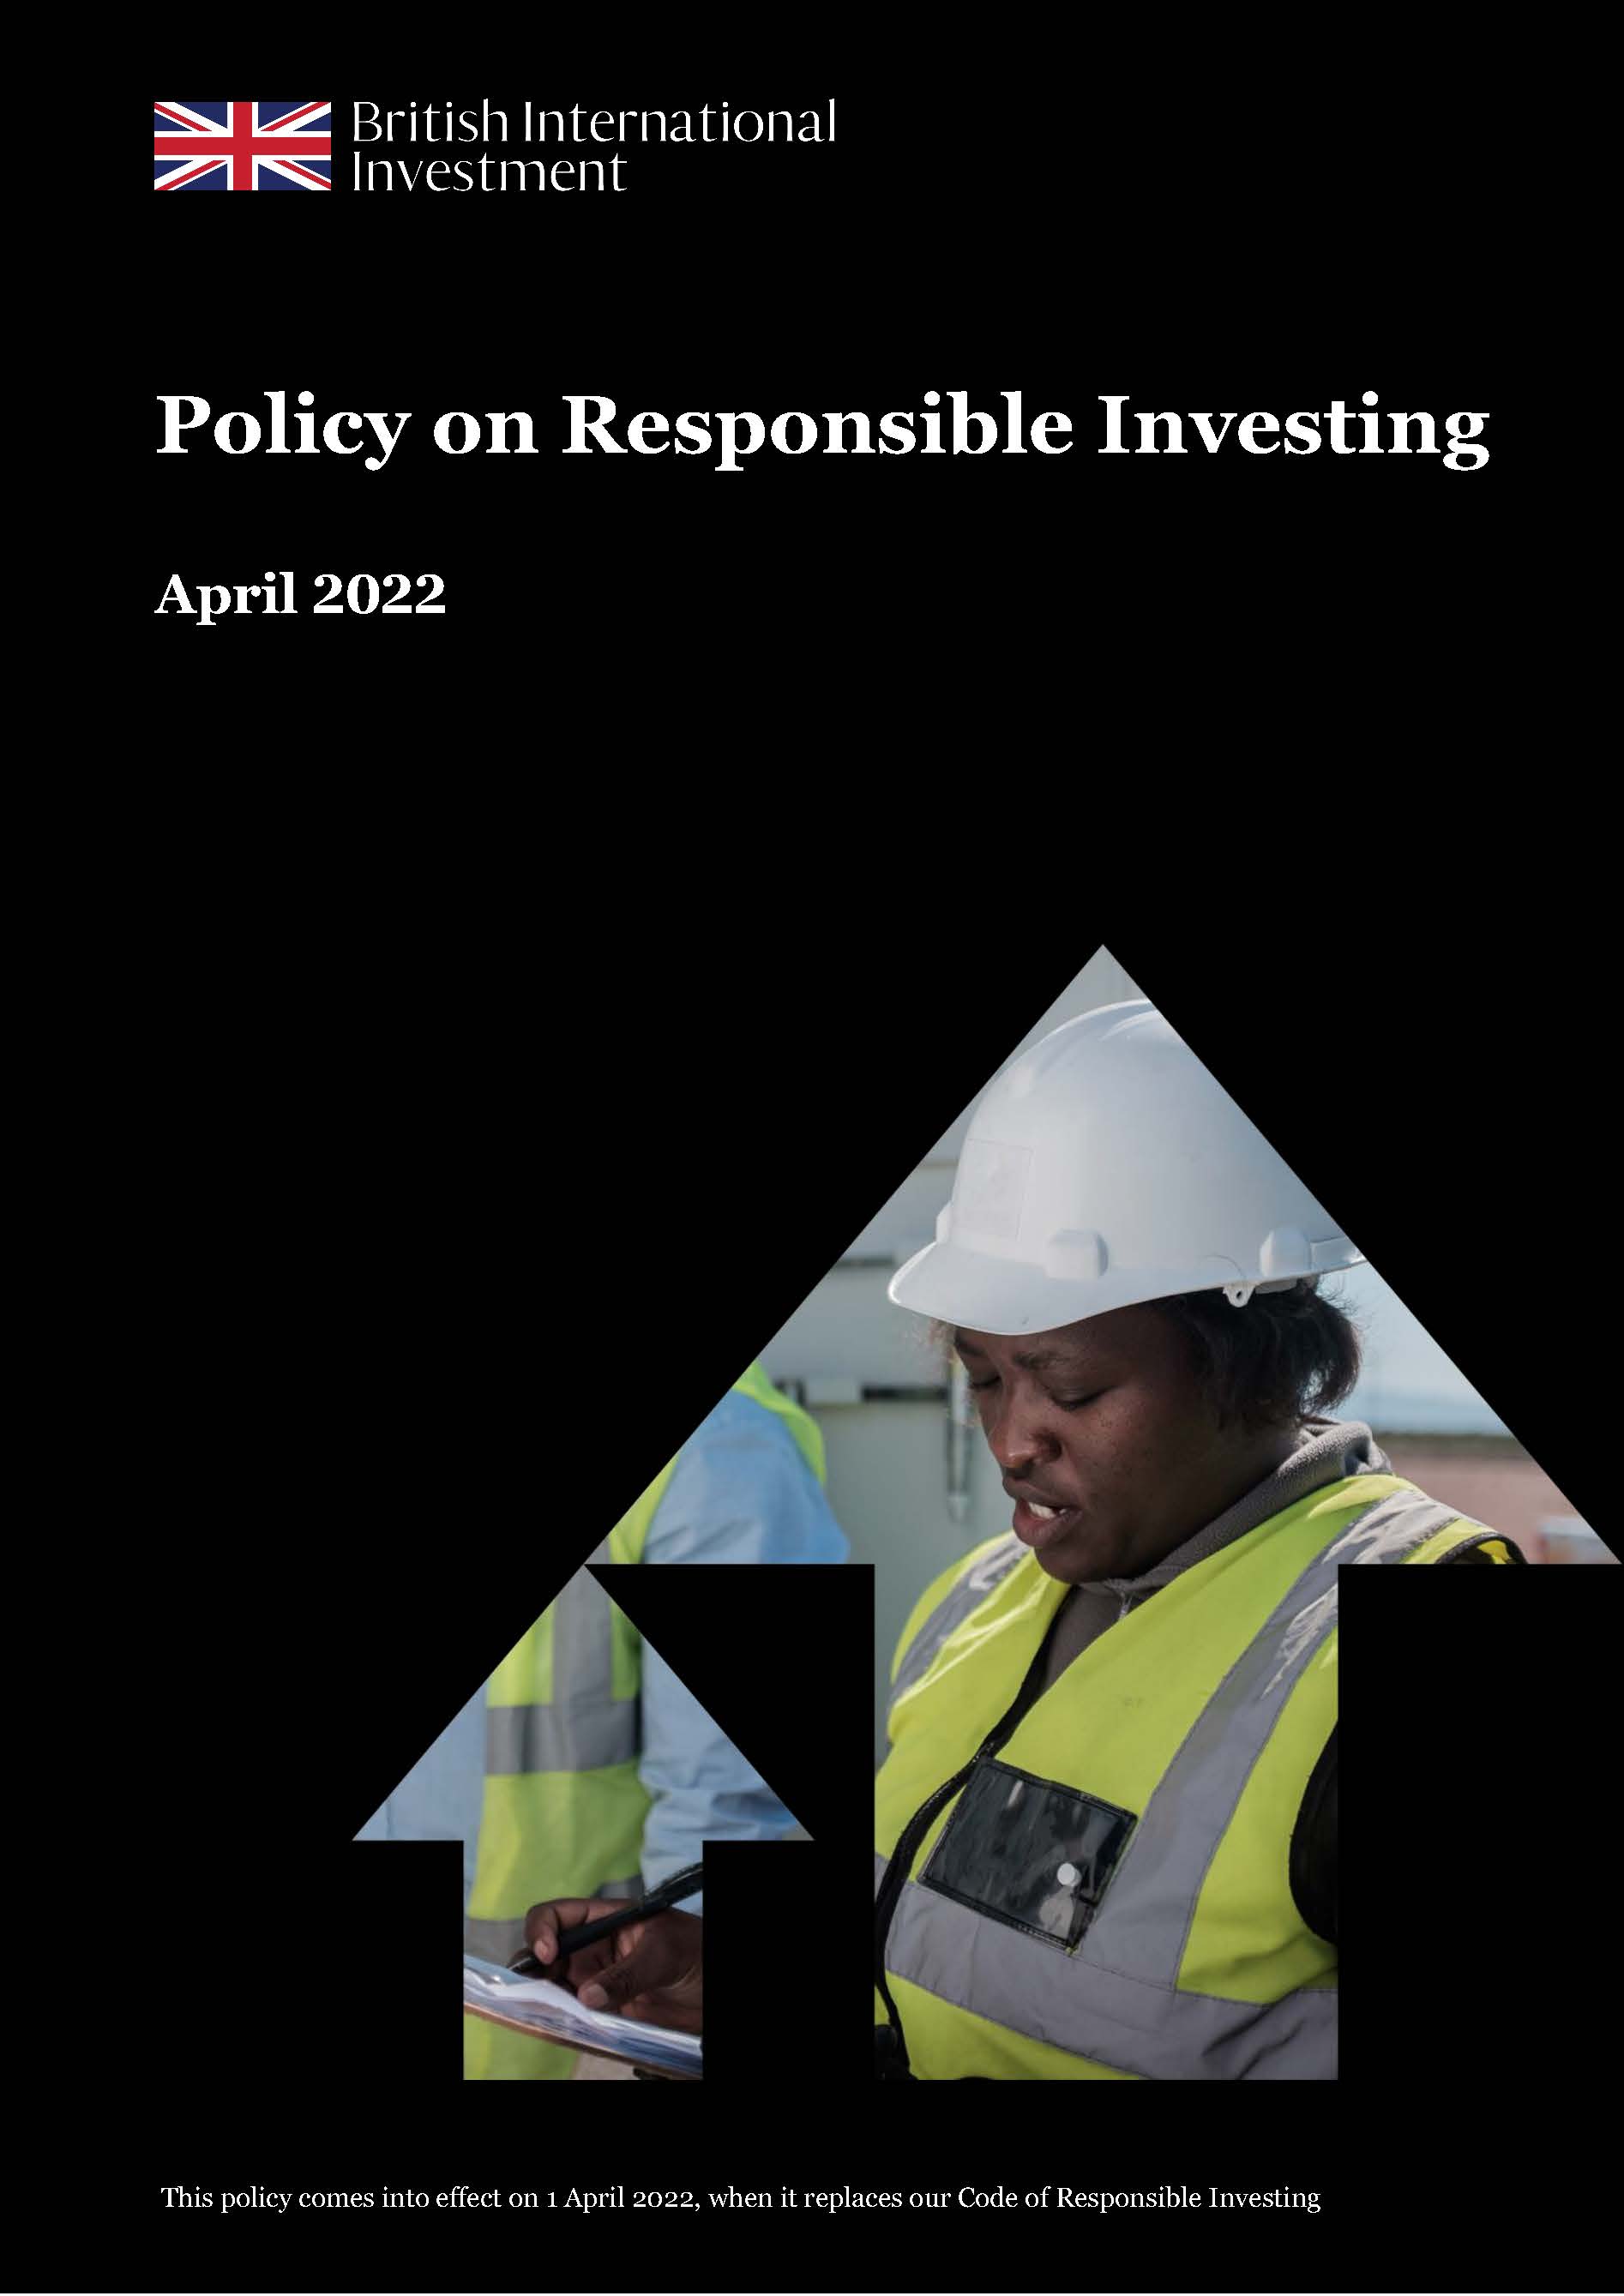 CDC Group Policy on Responsible Investing